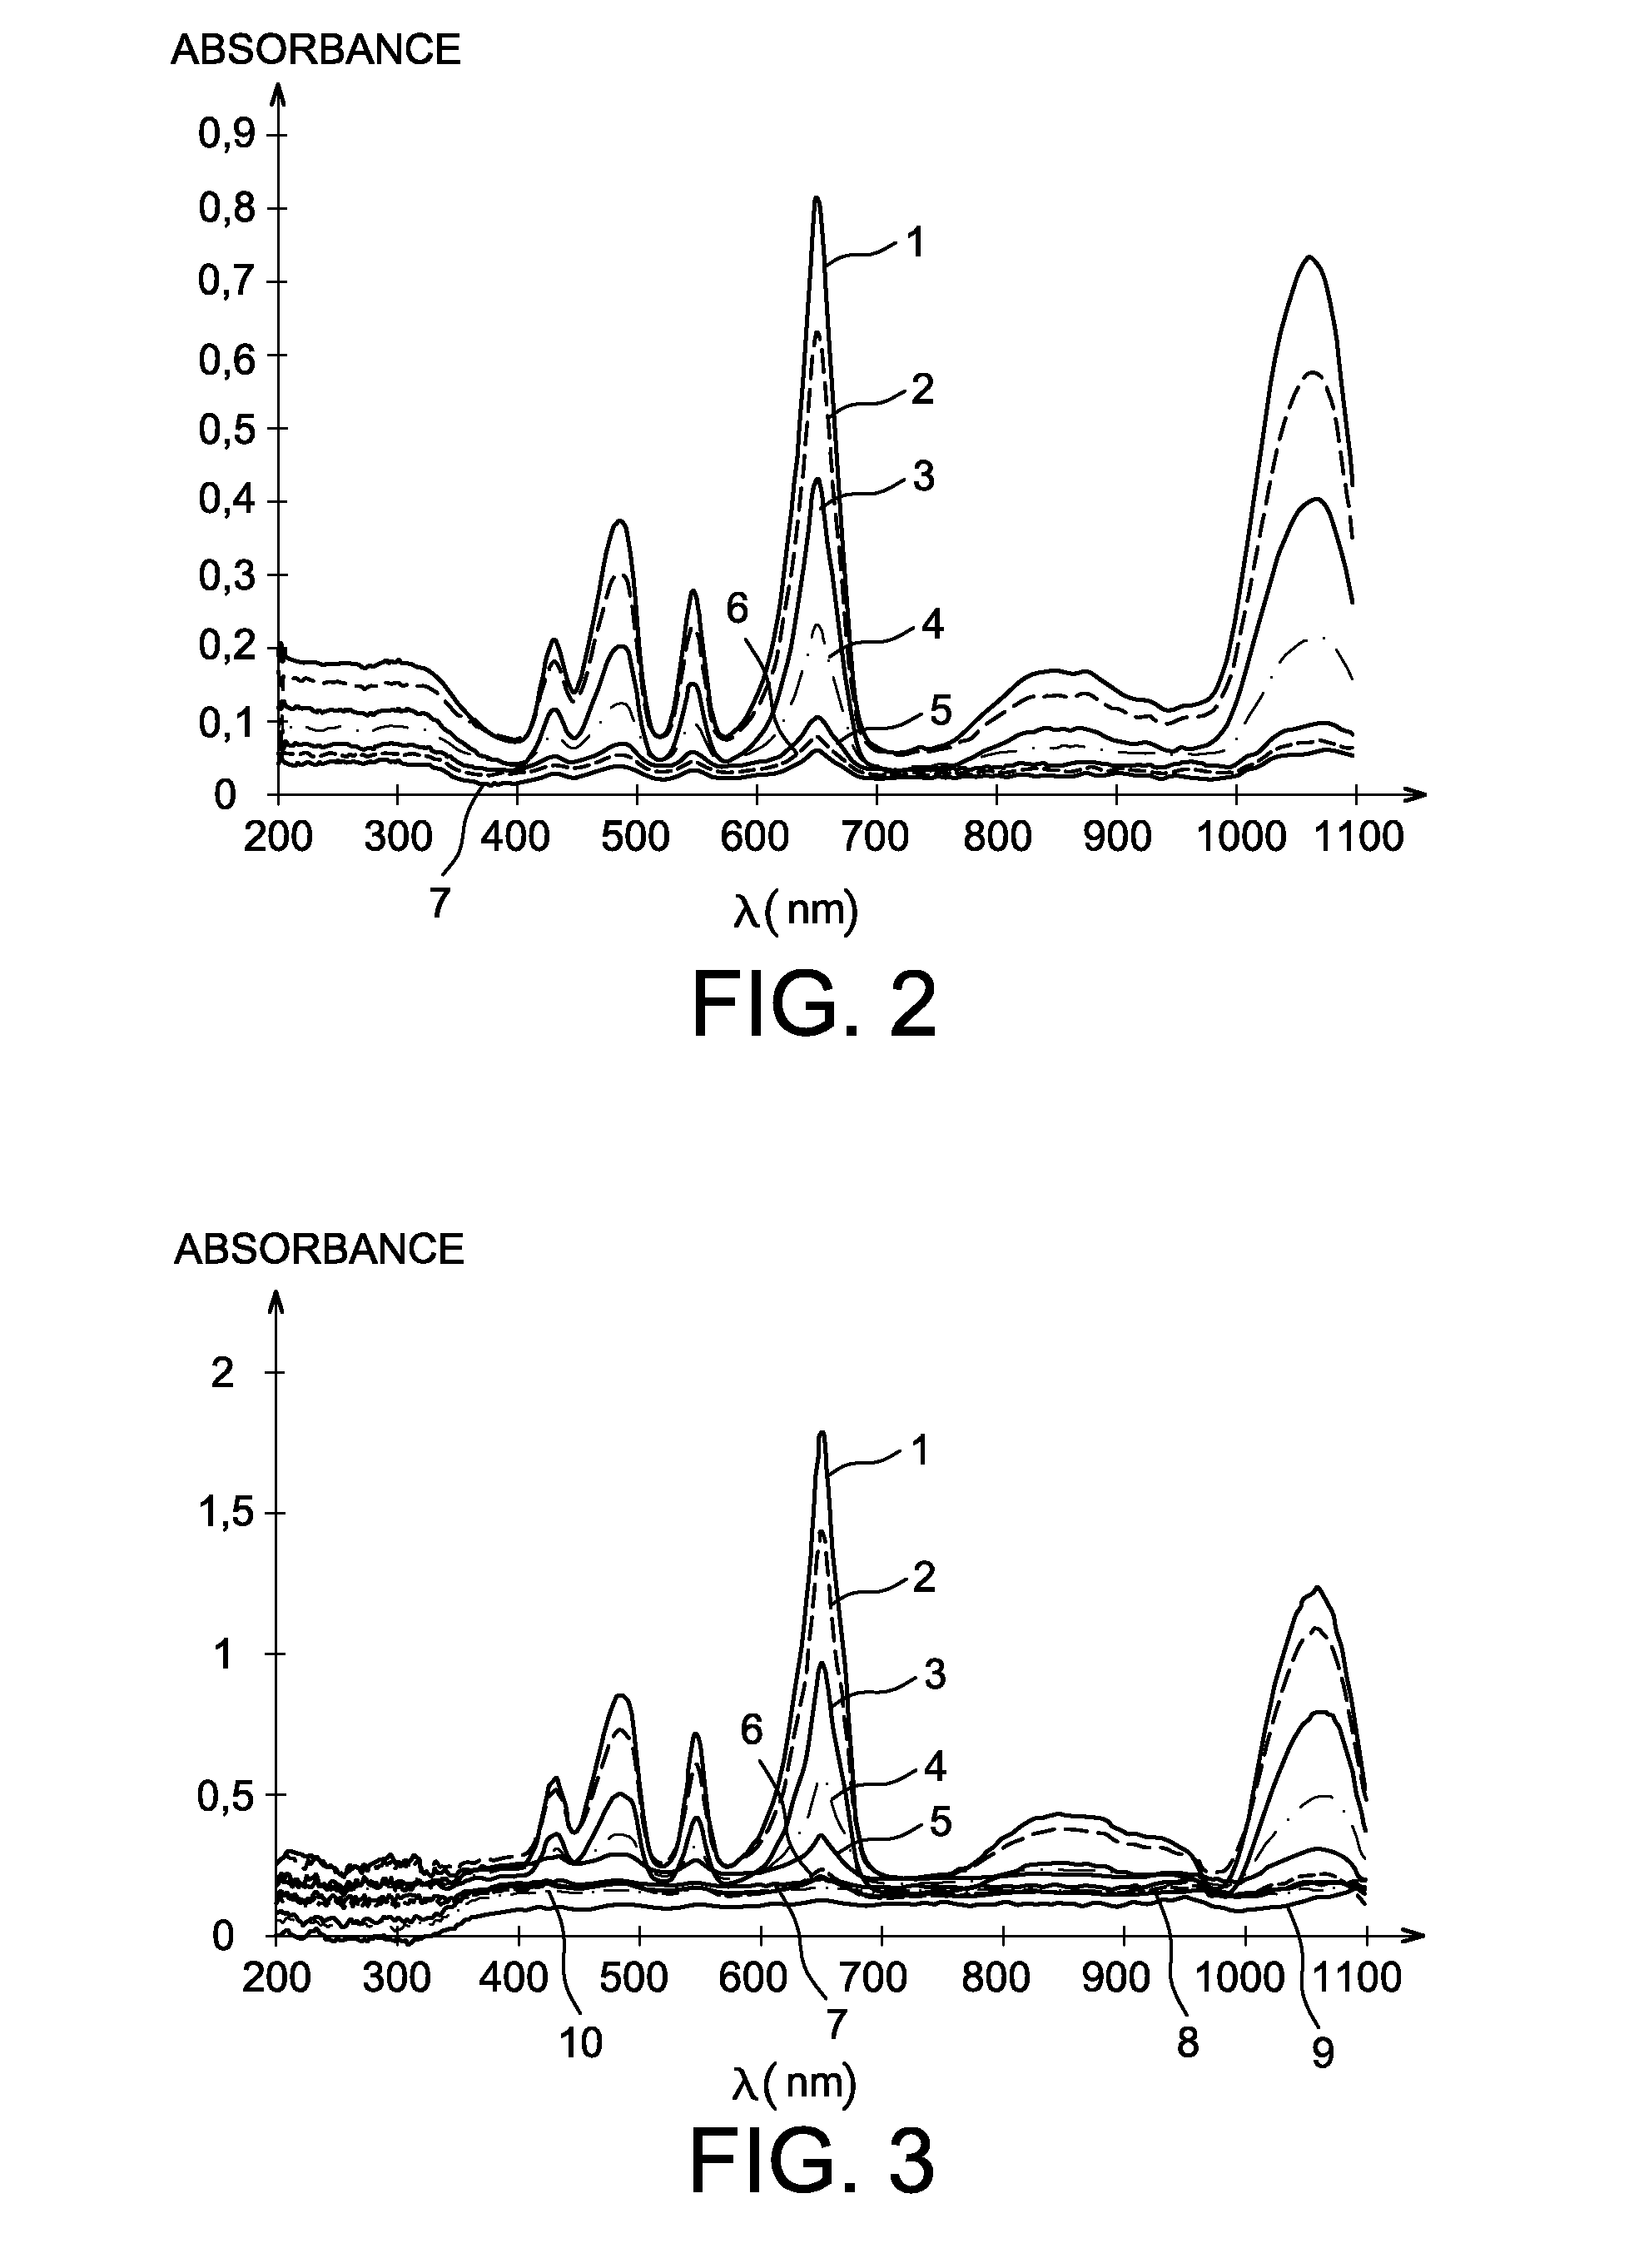 Method for measuring the uranium concentration of an aqueous solution by spectrophotometry